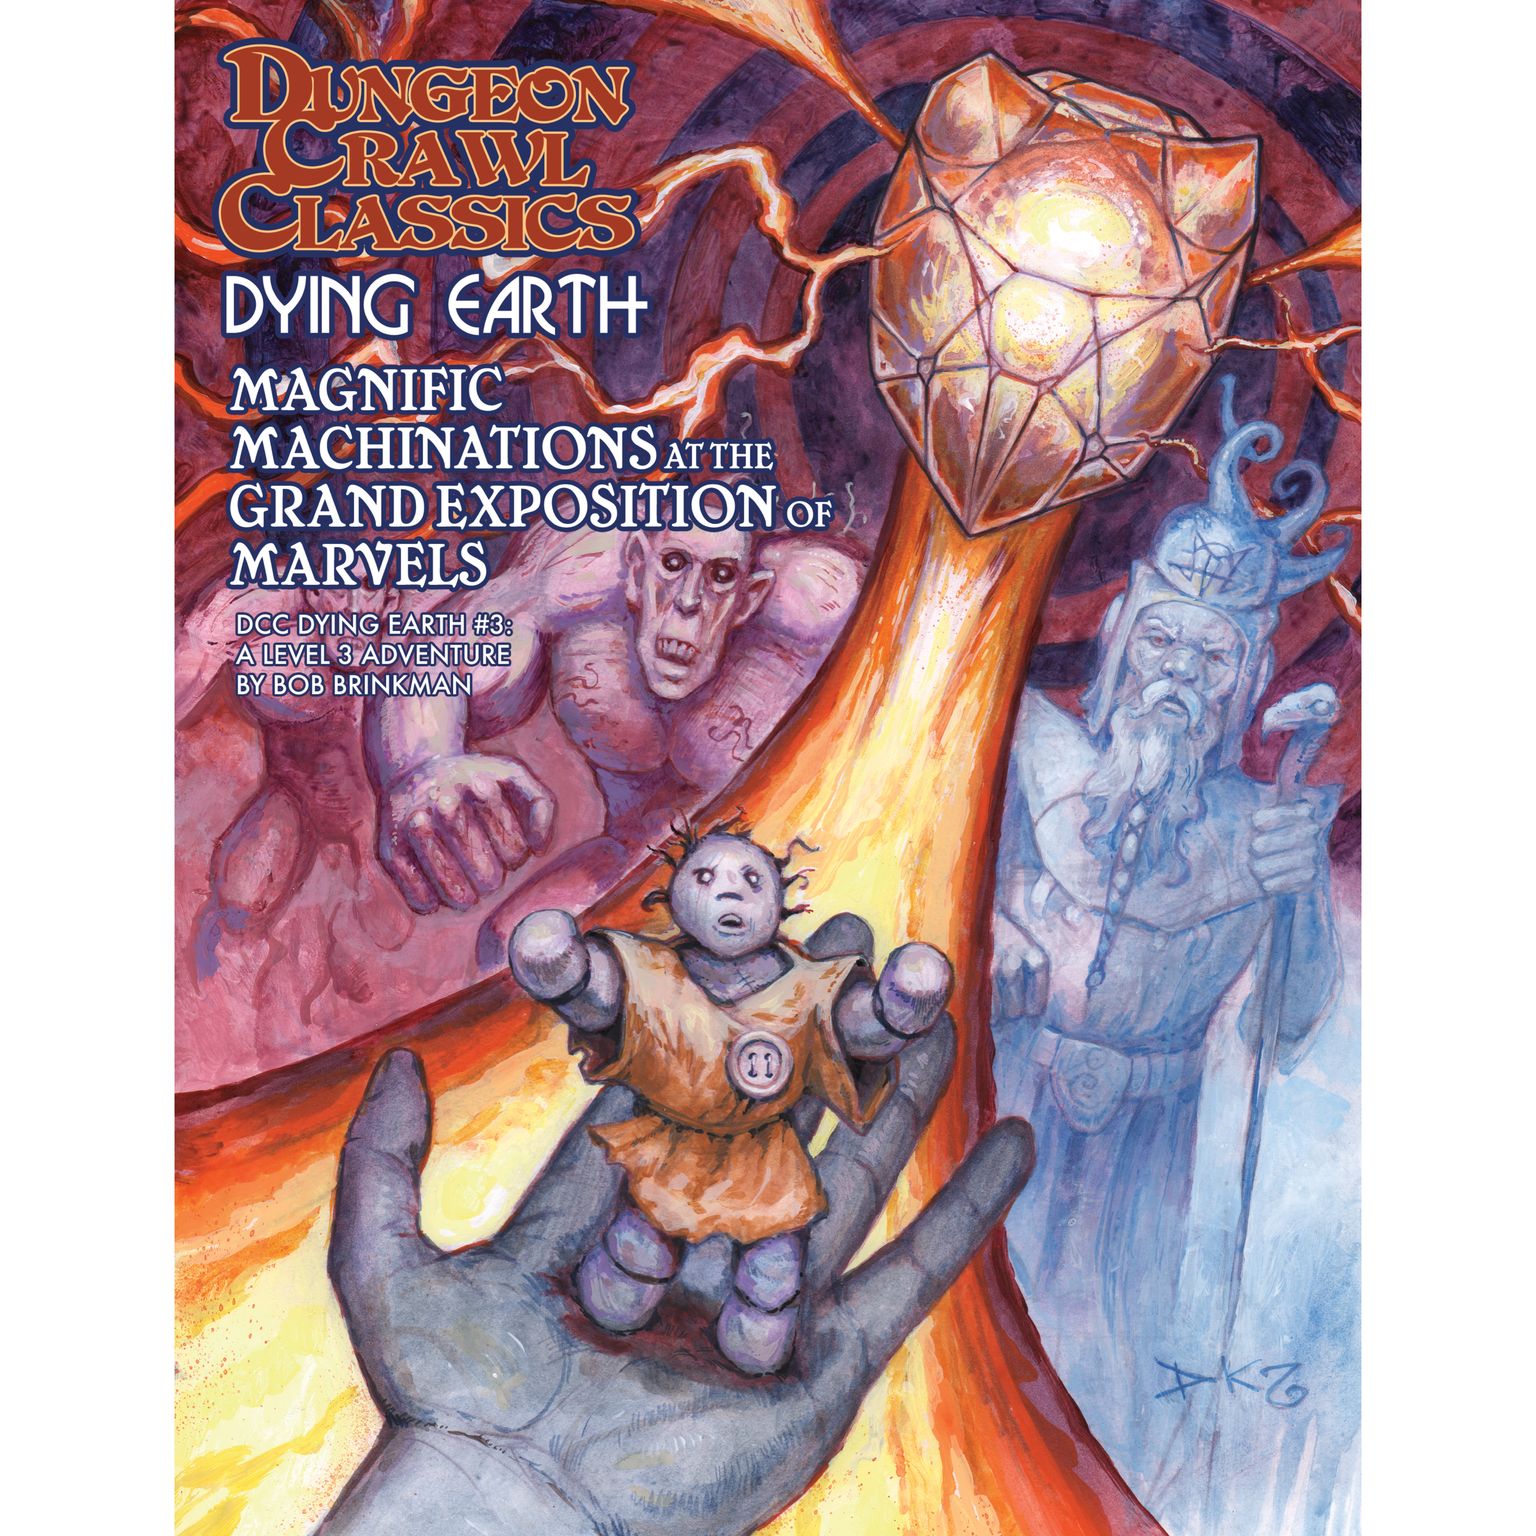 Dungeon Crawl Classics: Dying Earth #3: Magnificent Machinations At The Grand Expositions 